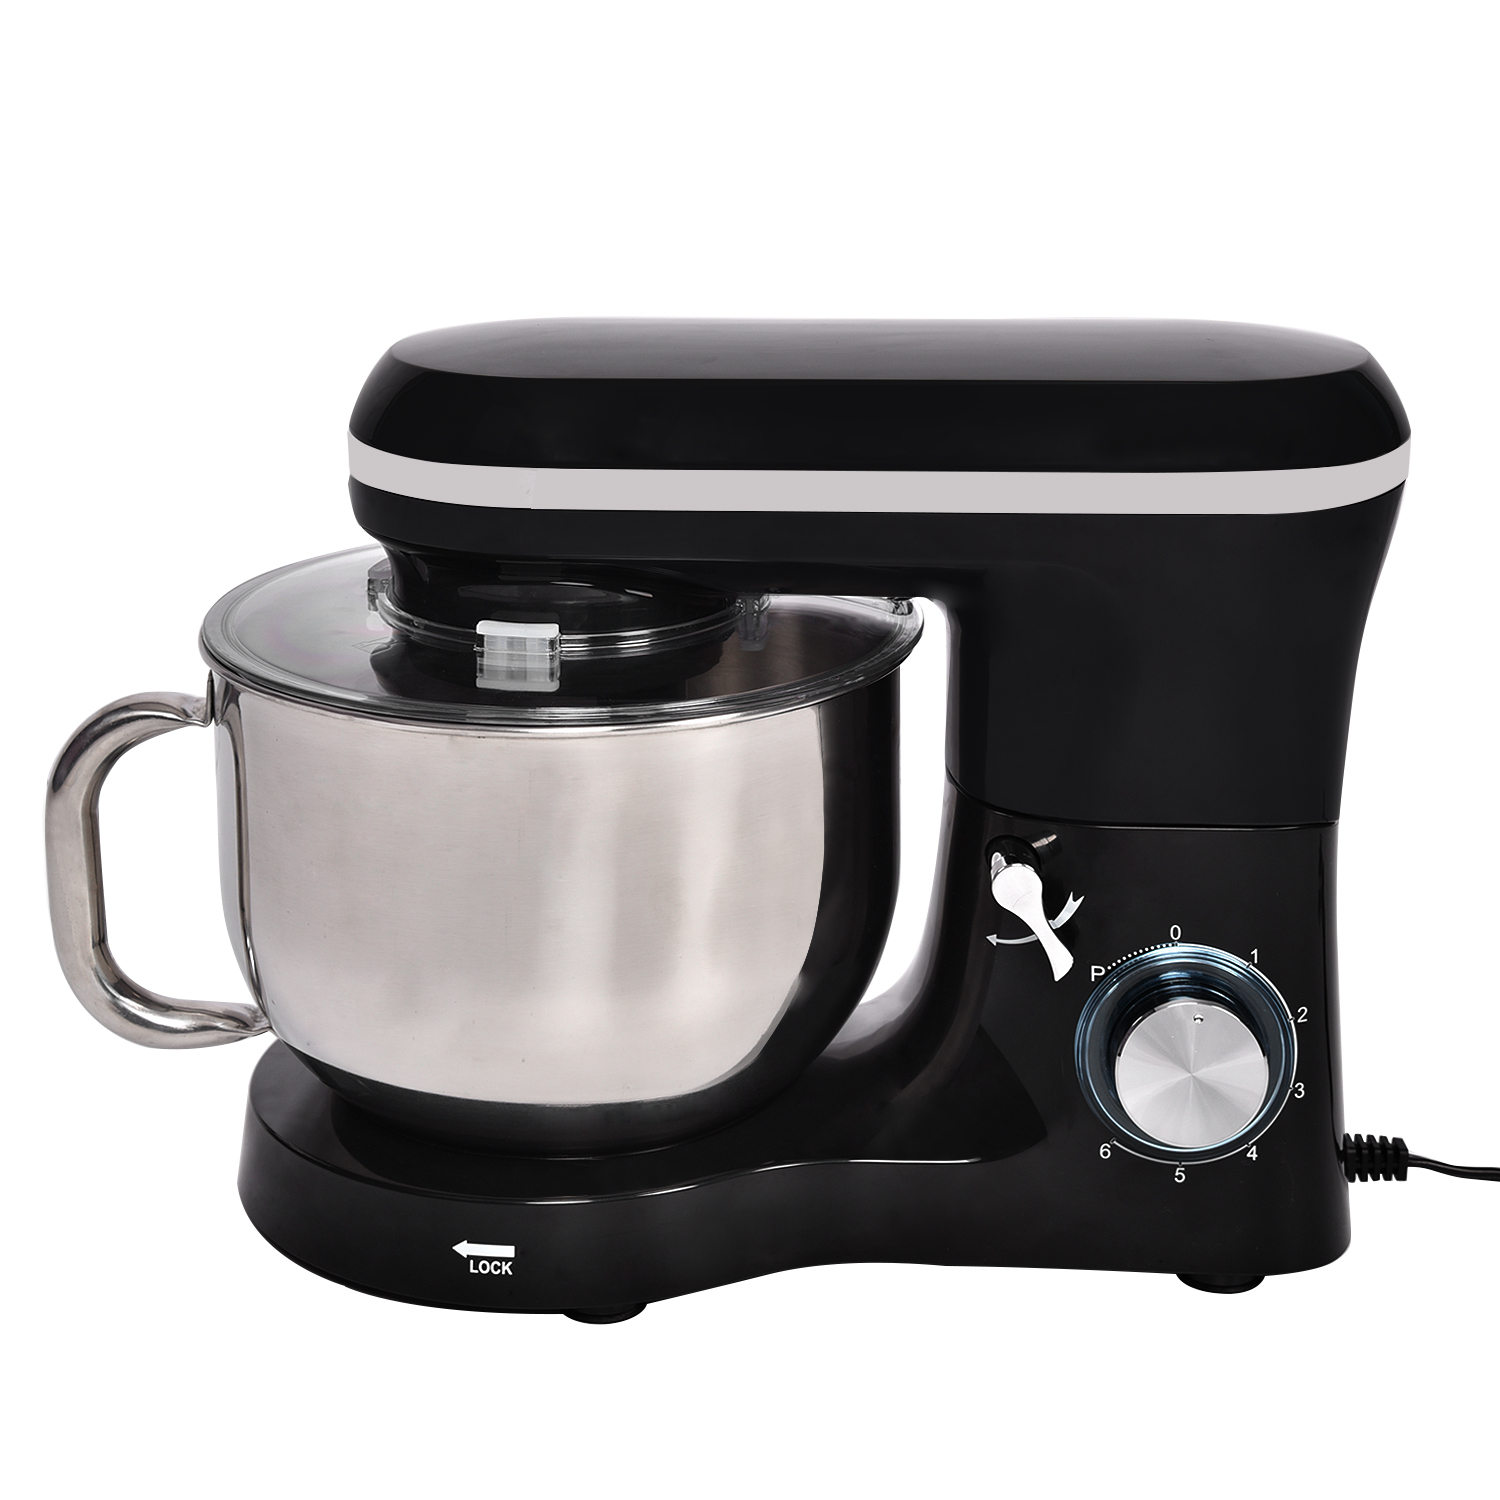 US-HW1025 HOWSTODAY 8-speed 4.5L Electric Kitchen Stand Mixer